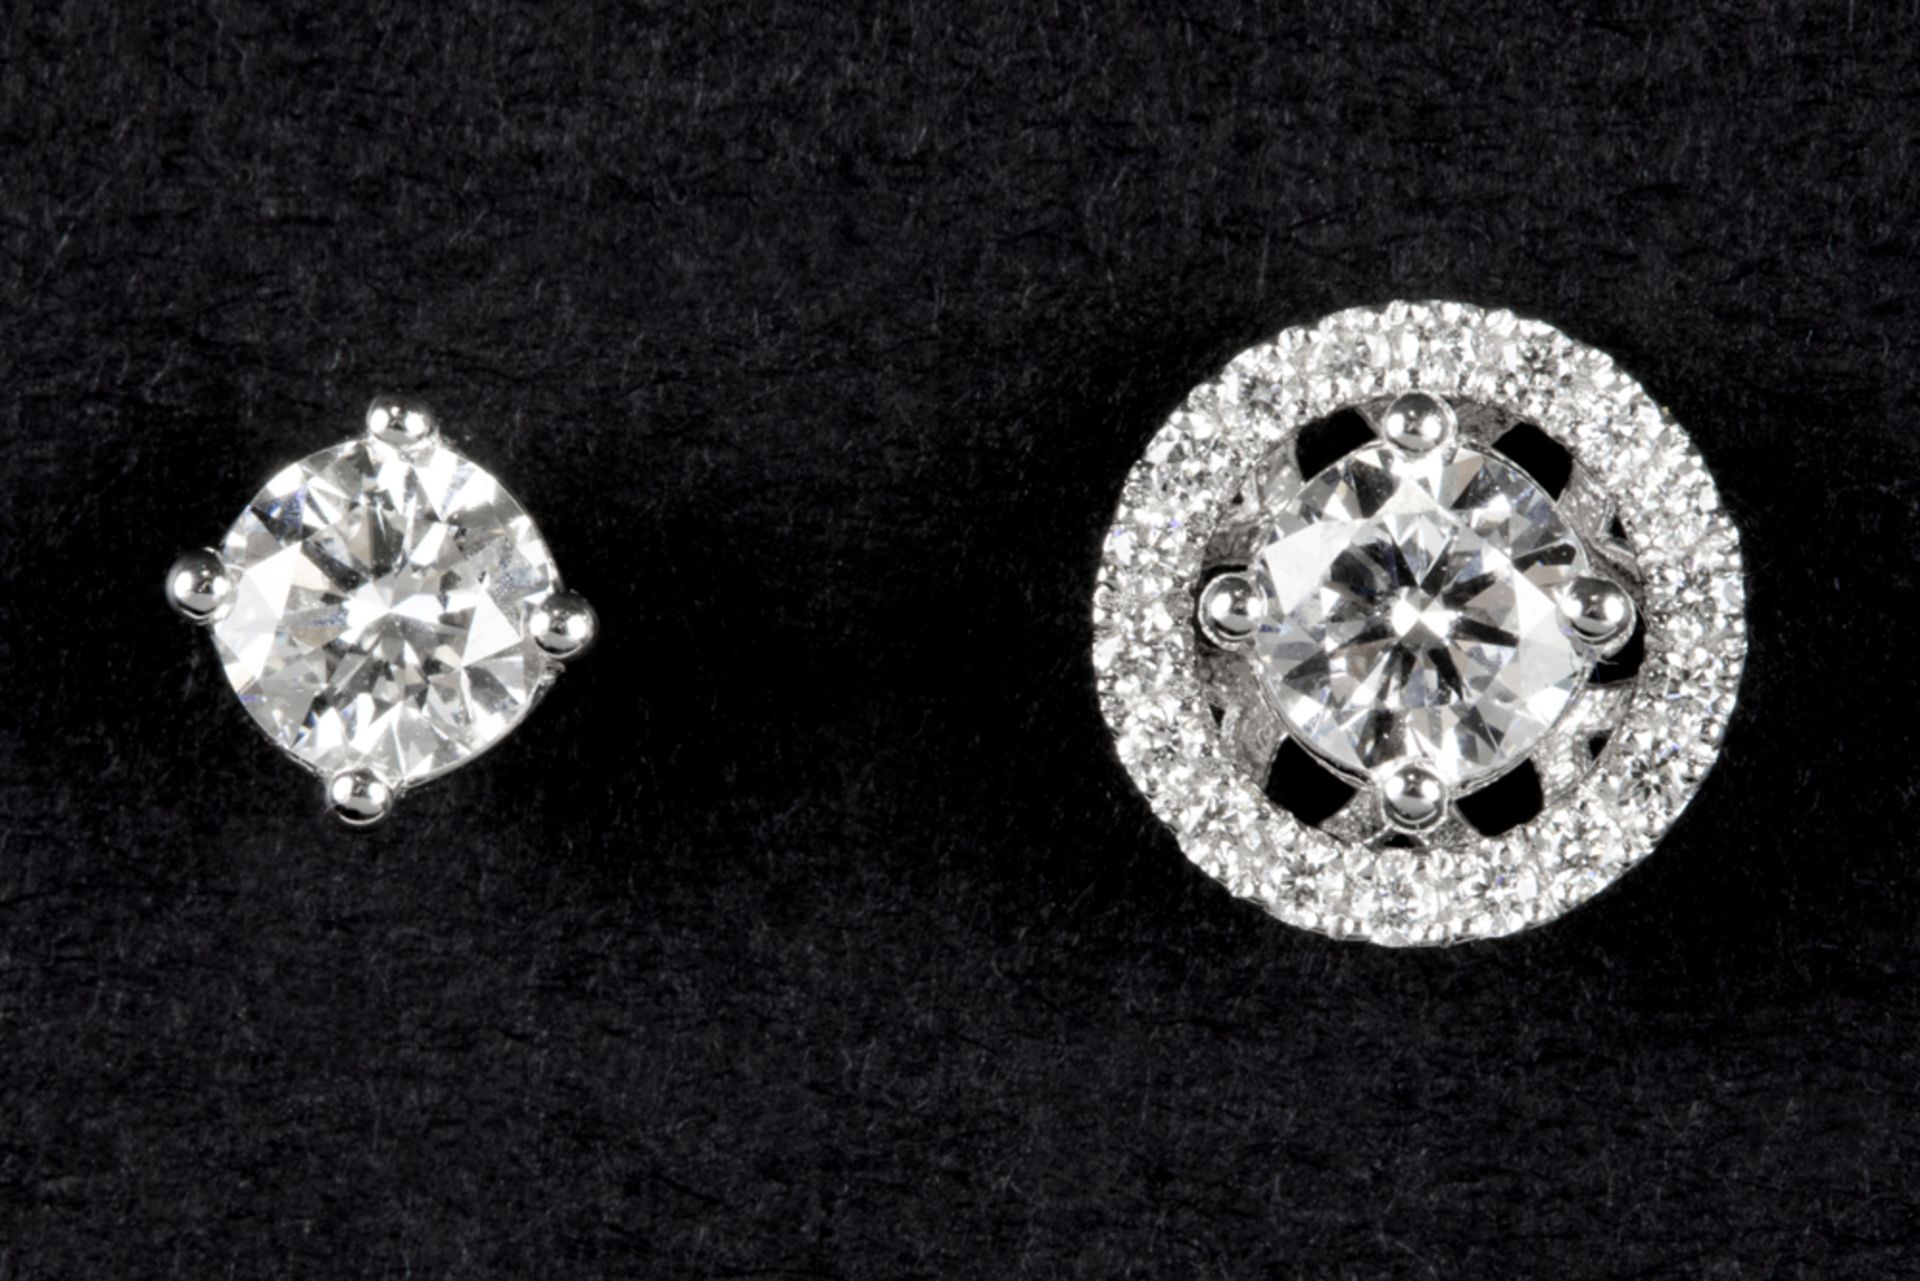 pair of earrings in white gold (18 carat) each with a bigger diamond surrounded by small ones - in - Bild 2 aus 3